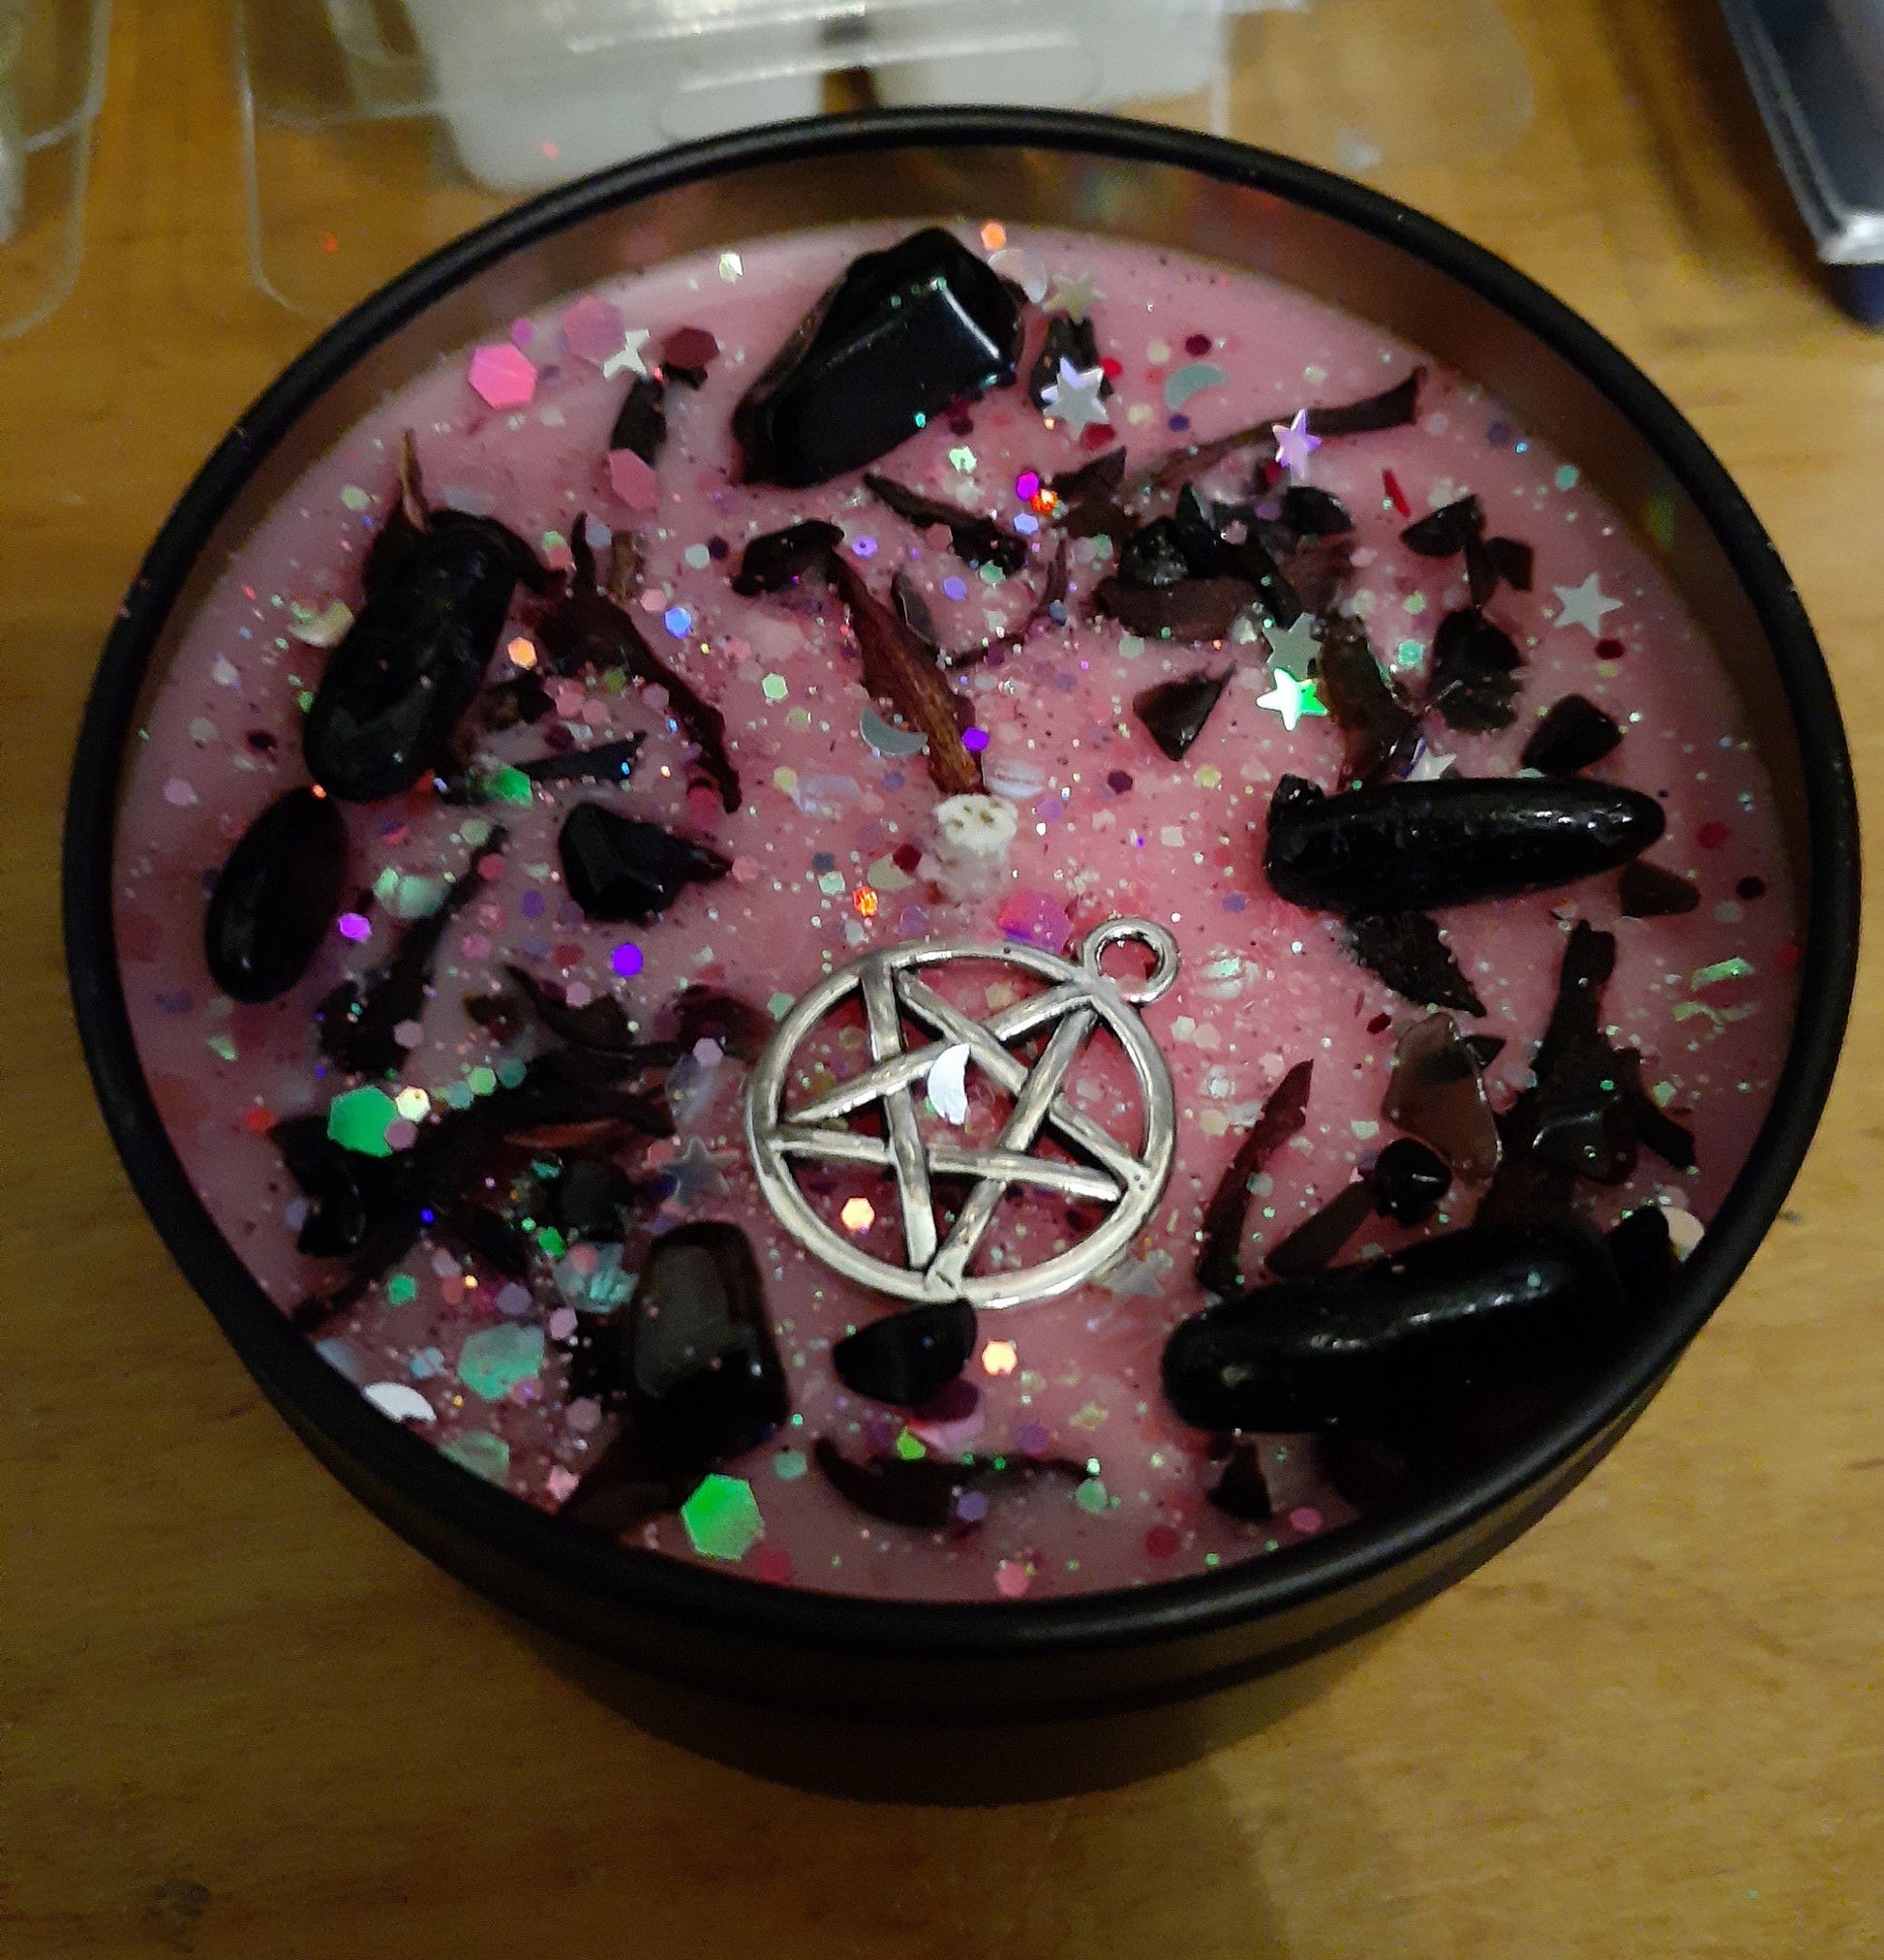 KALI Hindu Goddess of Death, Destruction, Time, Chaos, and Sexuality - Amber & Lavender w/Hibiscus and Obsidian - Pagan, Wicca, Wiccan